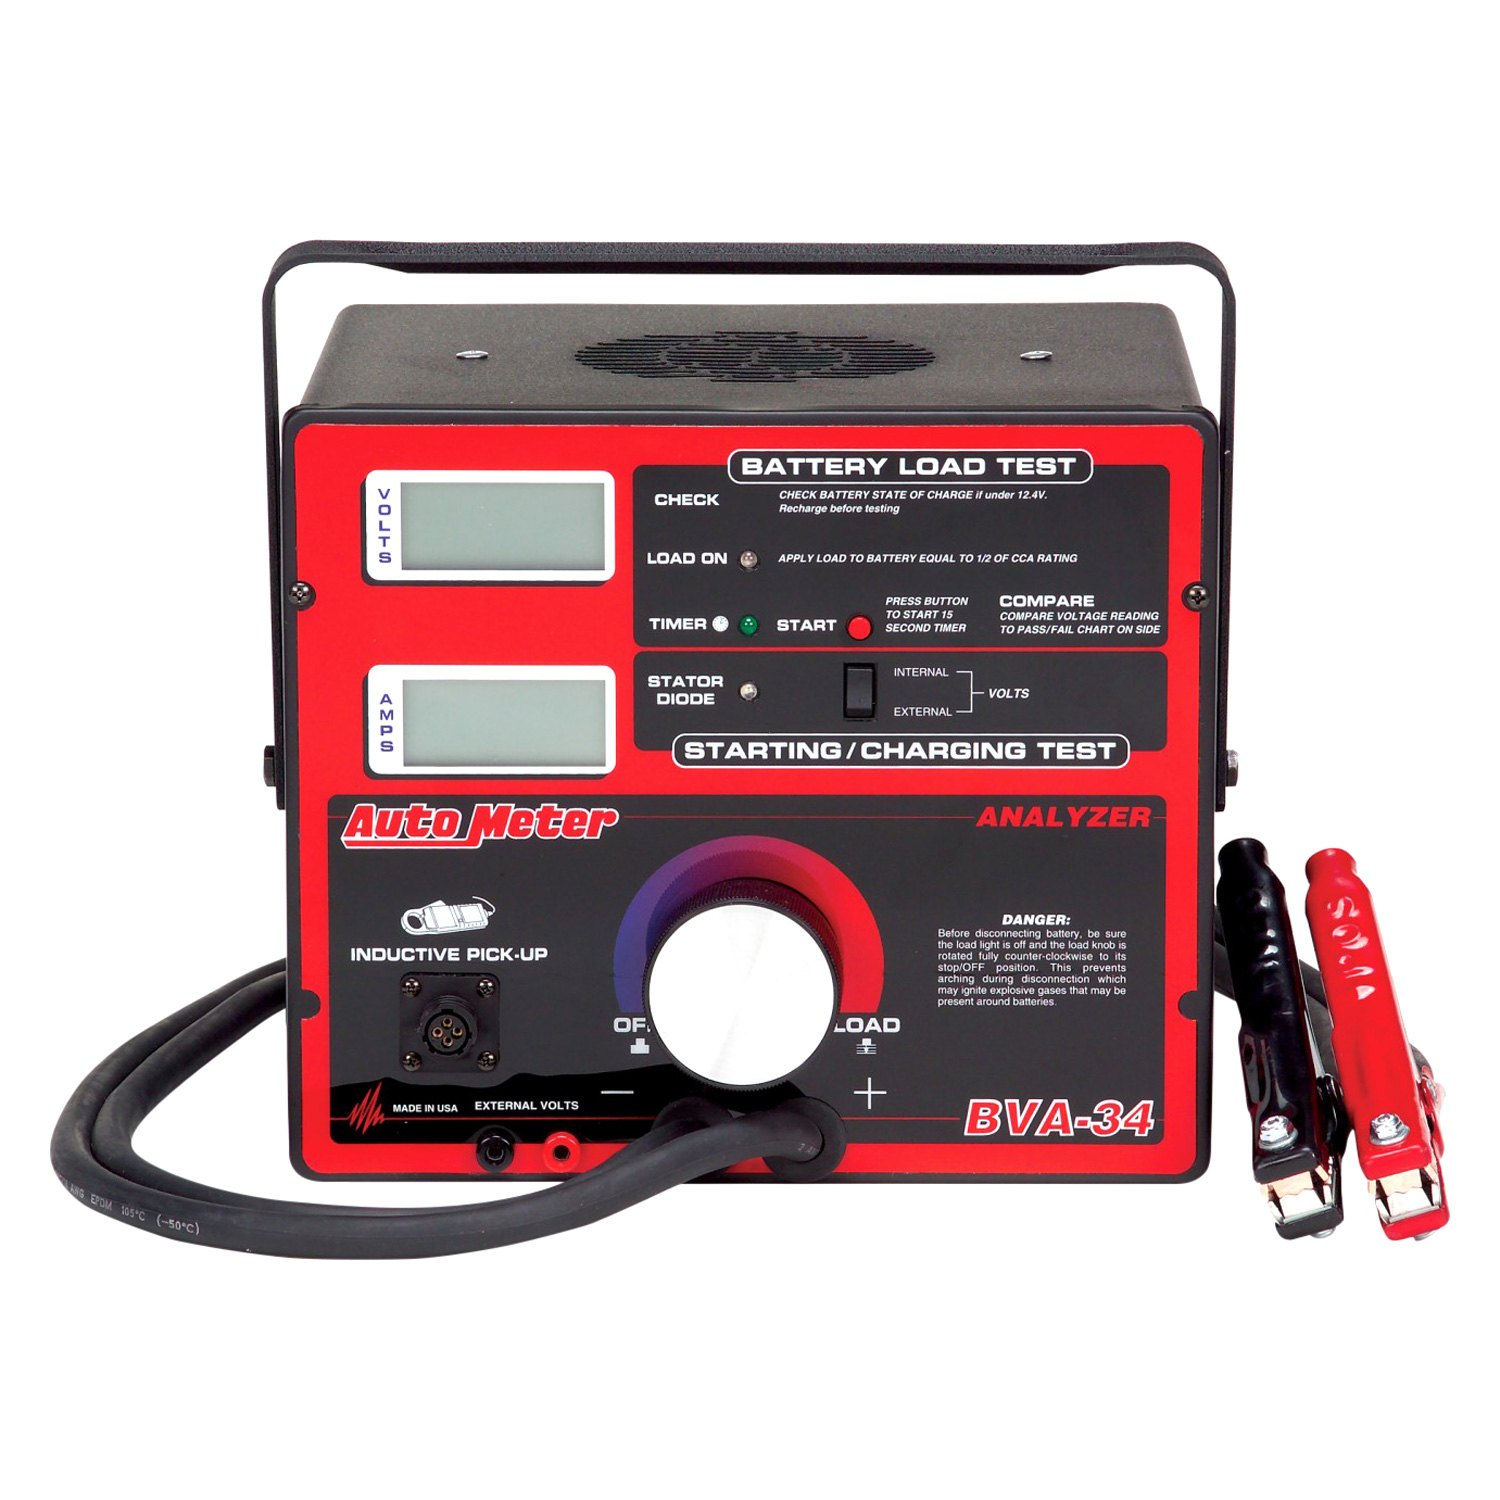 Battery Tester Electronic load. Neware Battery Tester System se 9360. Тестер FCL 4. Pile load Test. Electrical battery